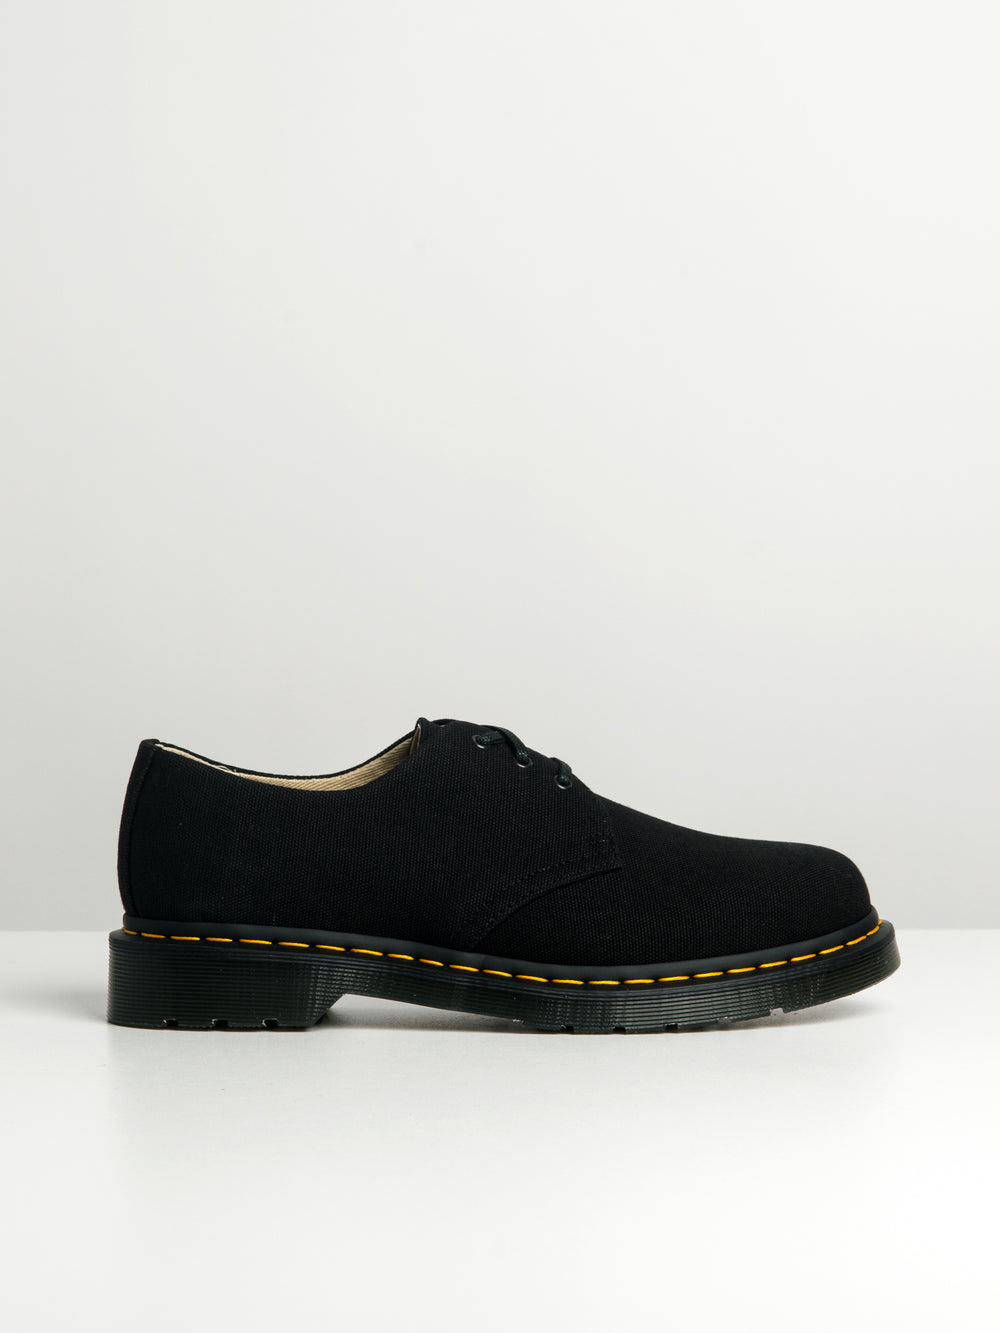 WOMENS DR MARTENS 1461 NATURAL OXFORD SHOES